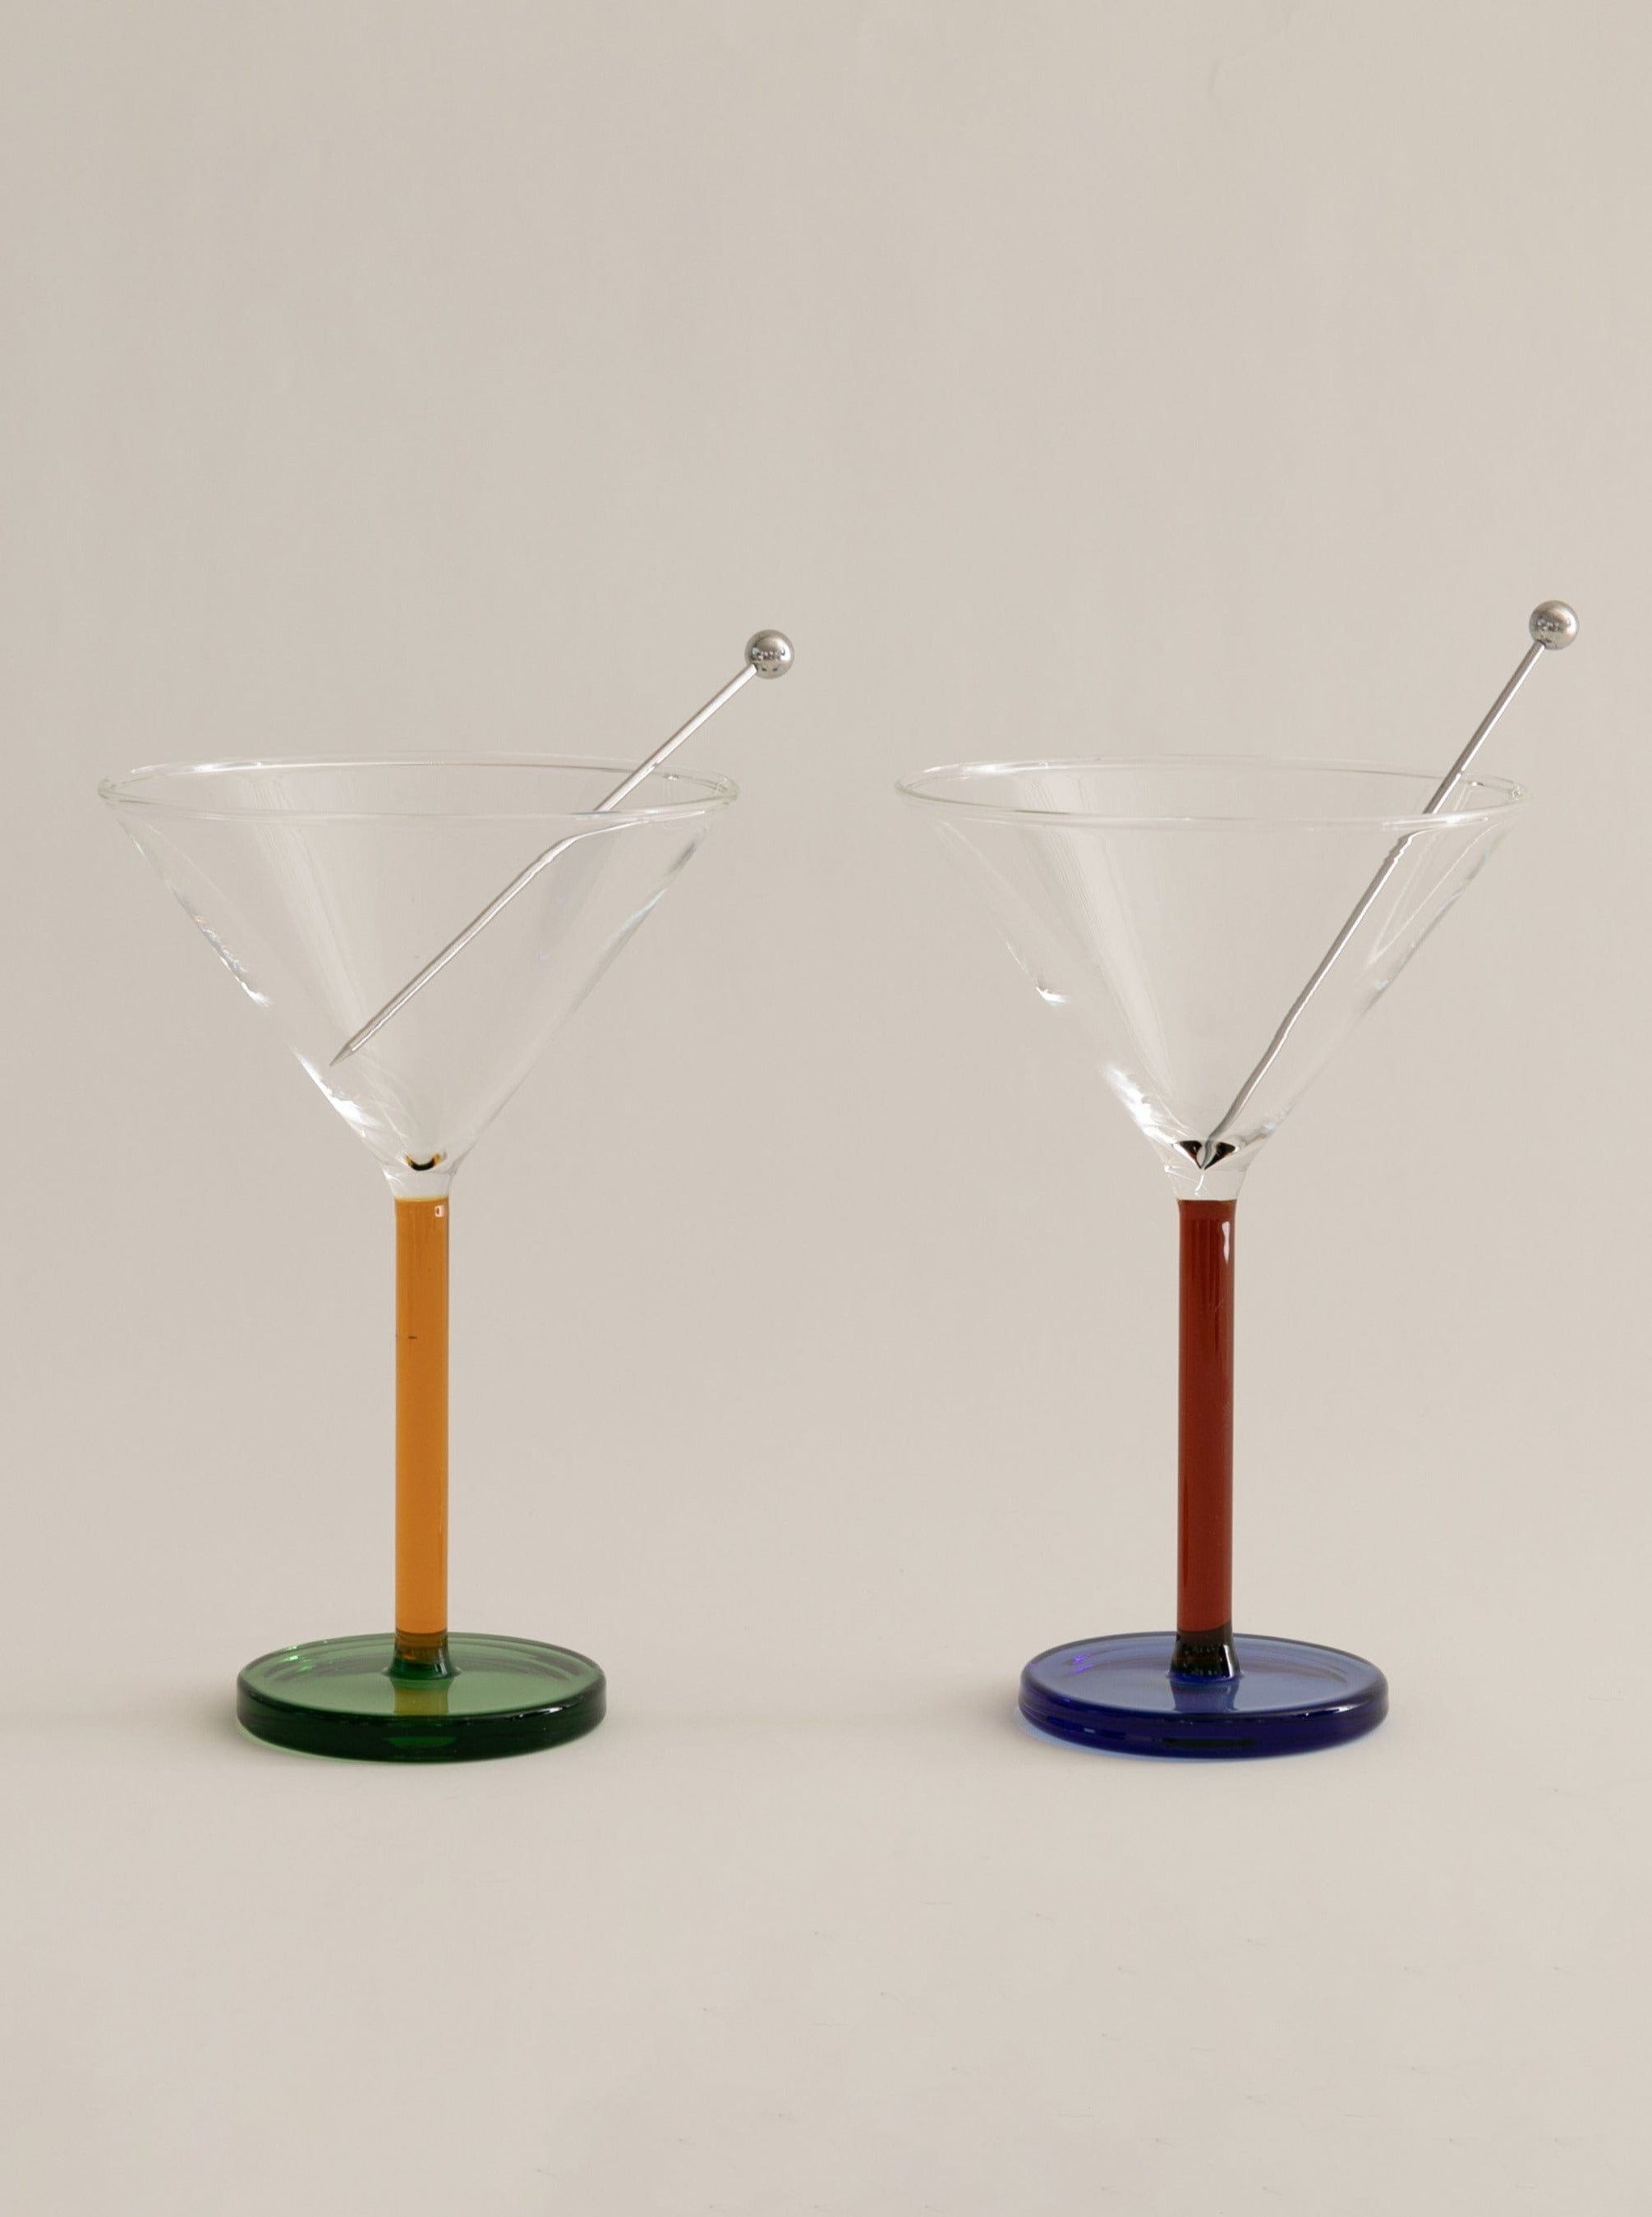 Scallop Shell Etched Martini Glass Set